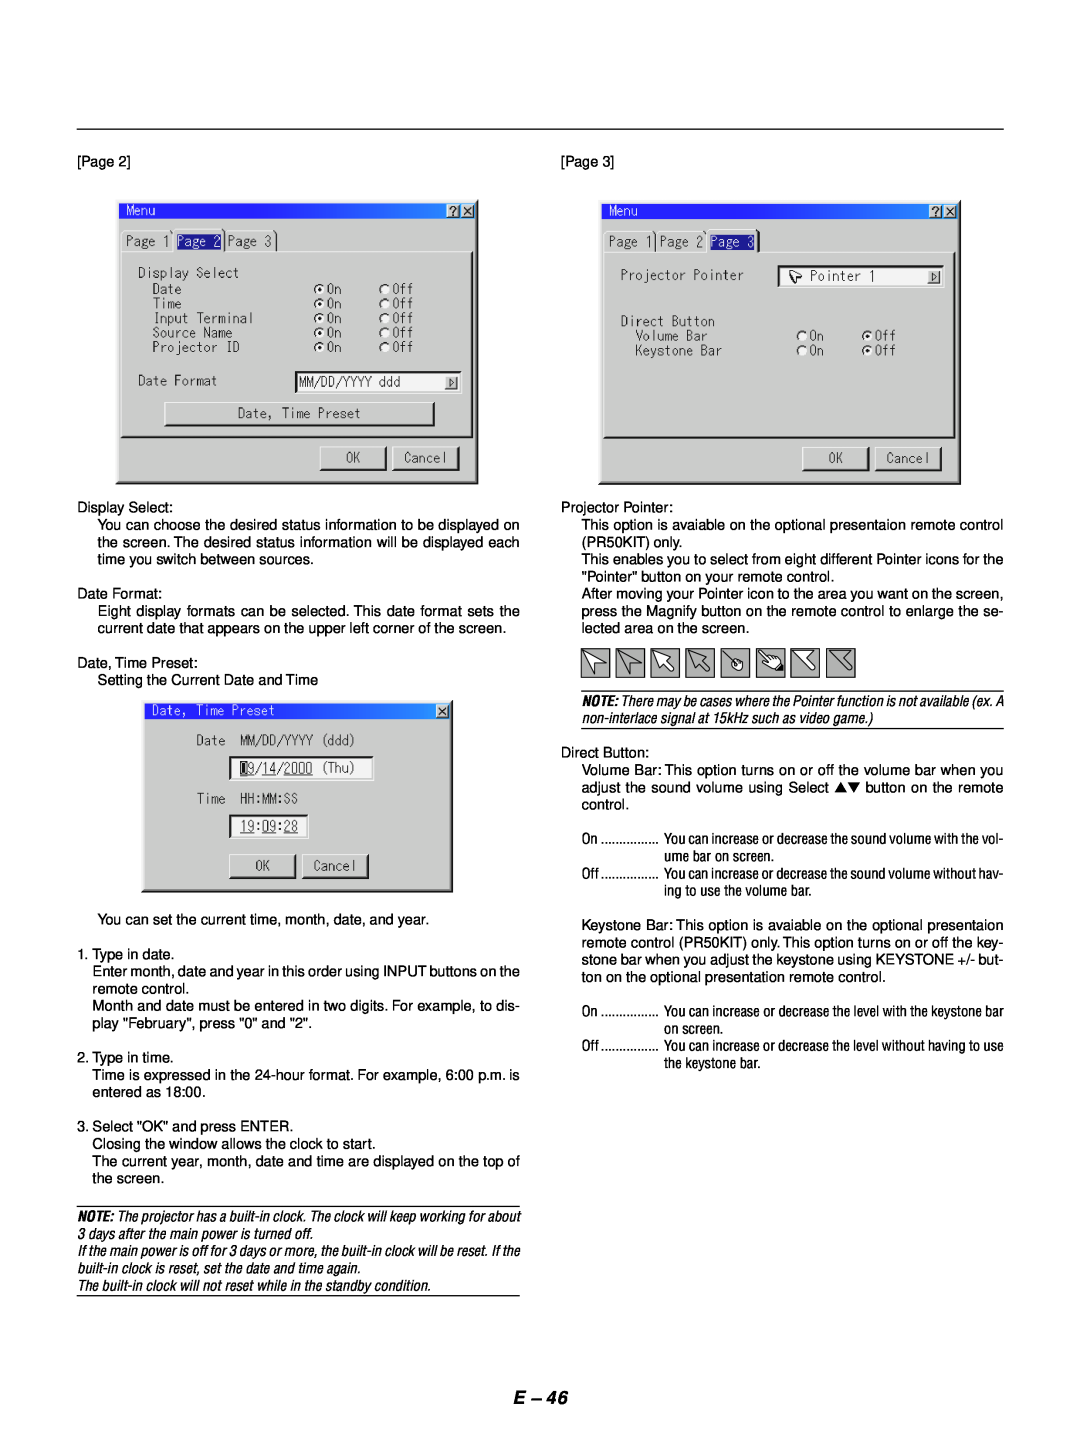 NEC GT1150 user manual Page Display Select, The built-in clock will not reset while in the standby condition 